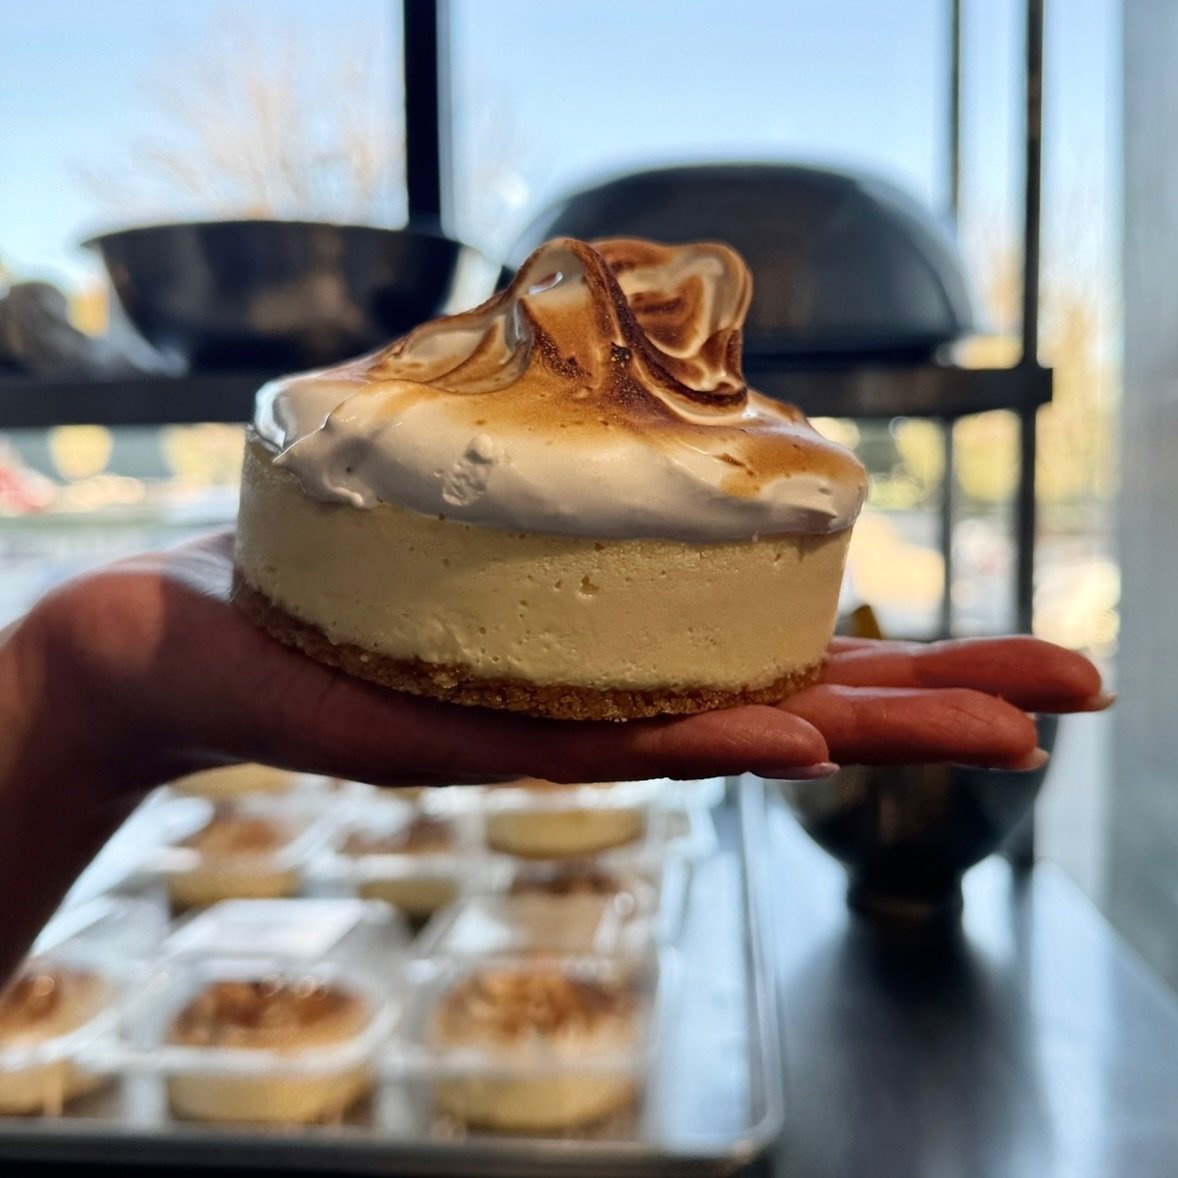 Weekly cheesecake in the cooler! Classic vanilla cheesecake base swirled with fresh lemon curd with a graham cracker crust. Topped with torched meringue. 🍋🍋